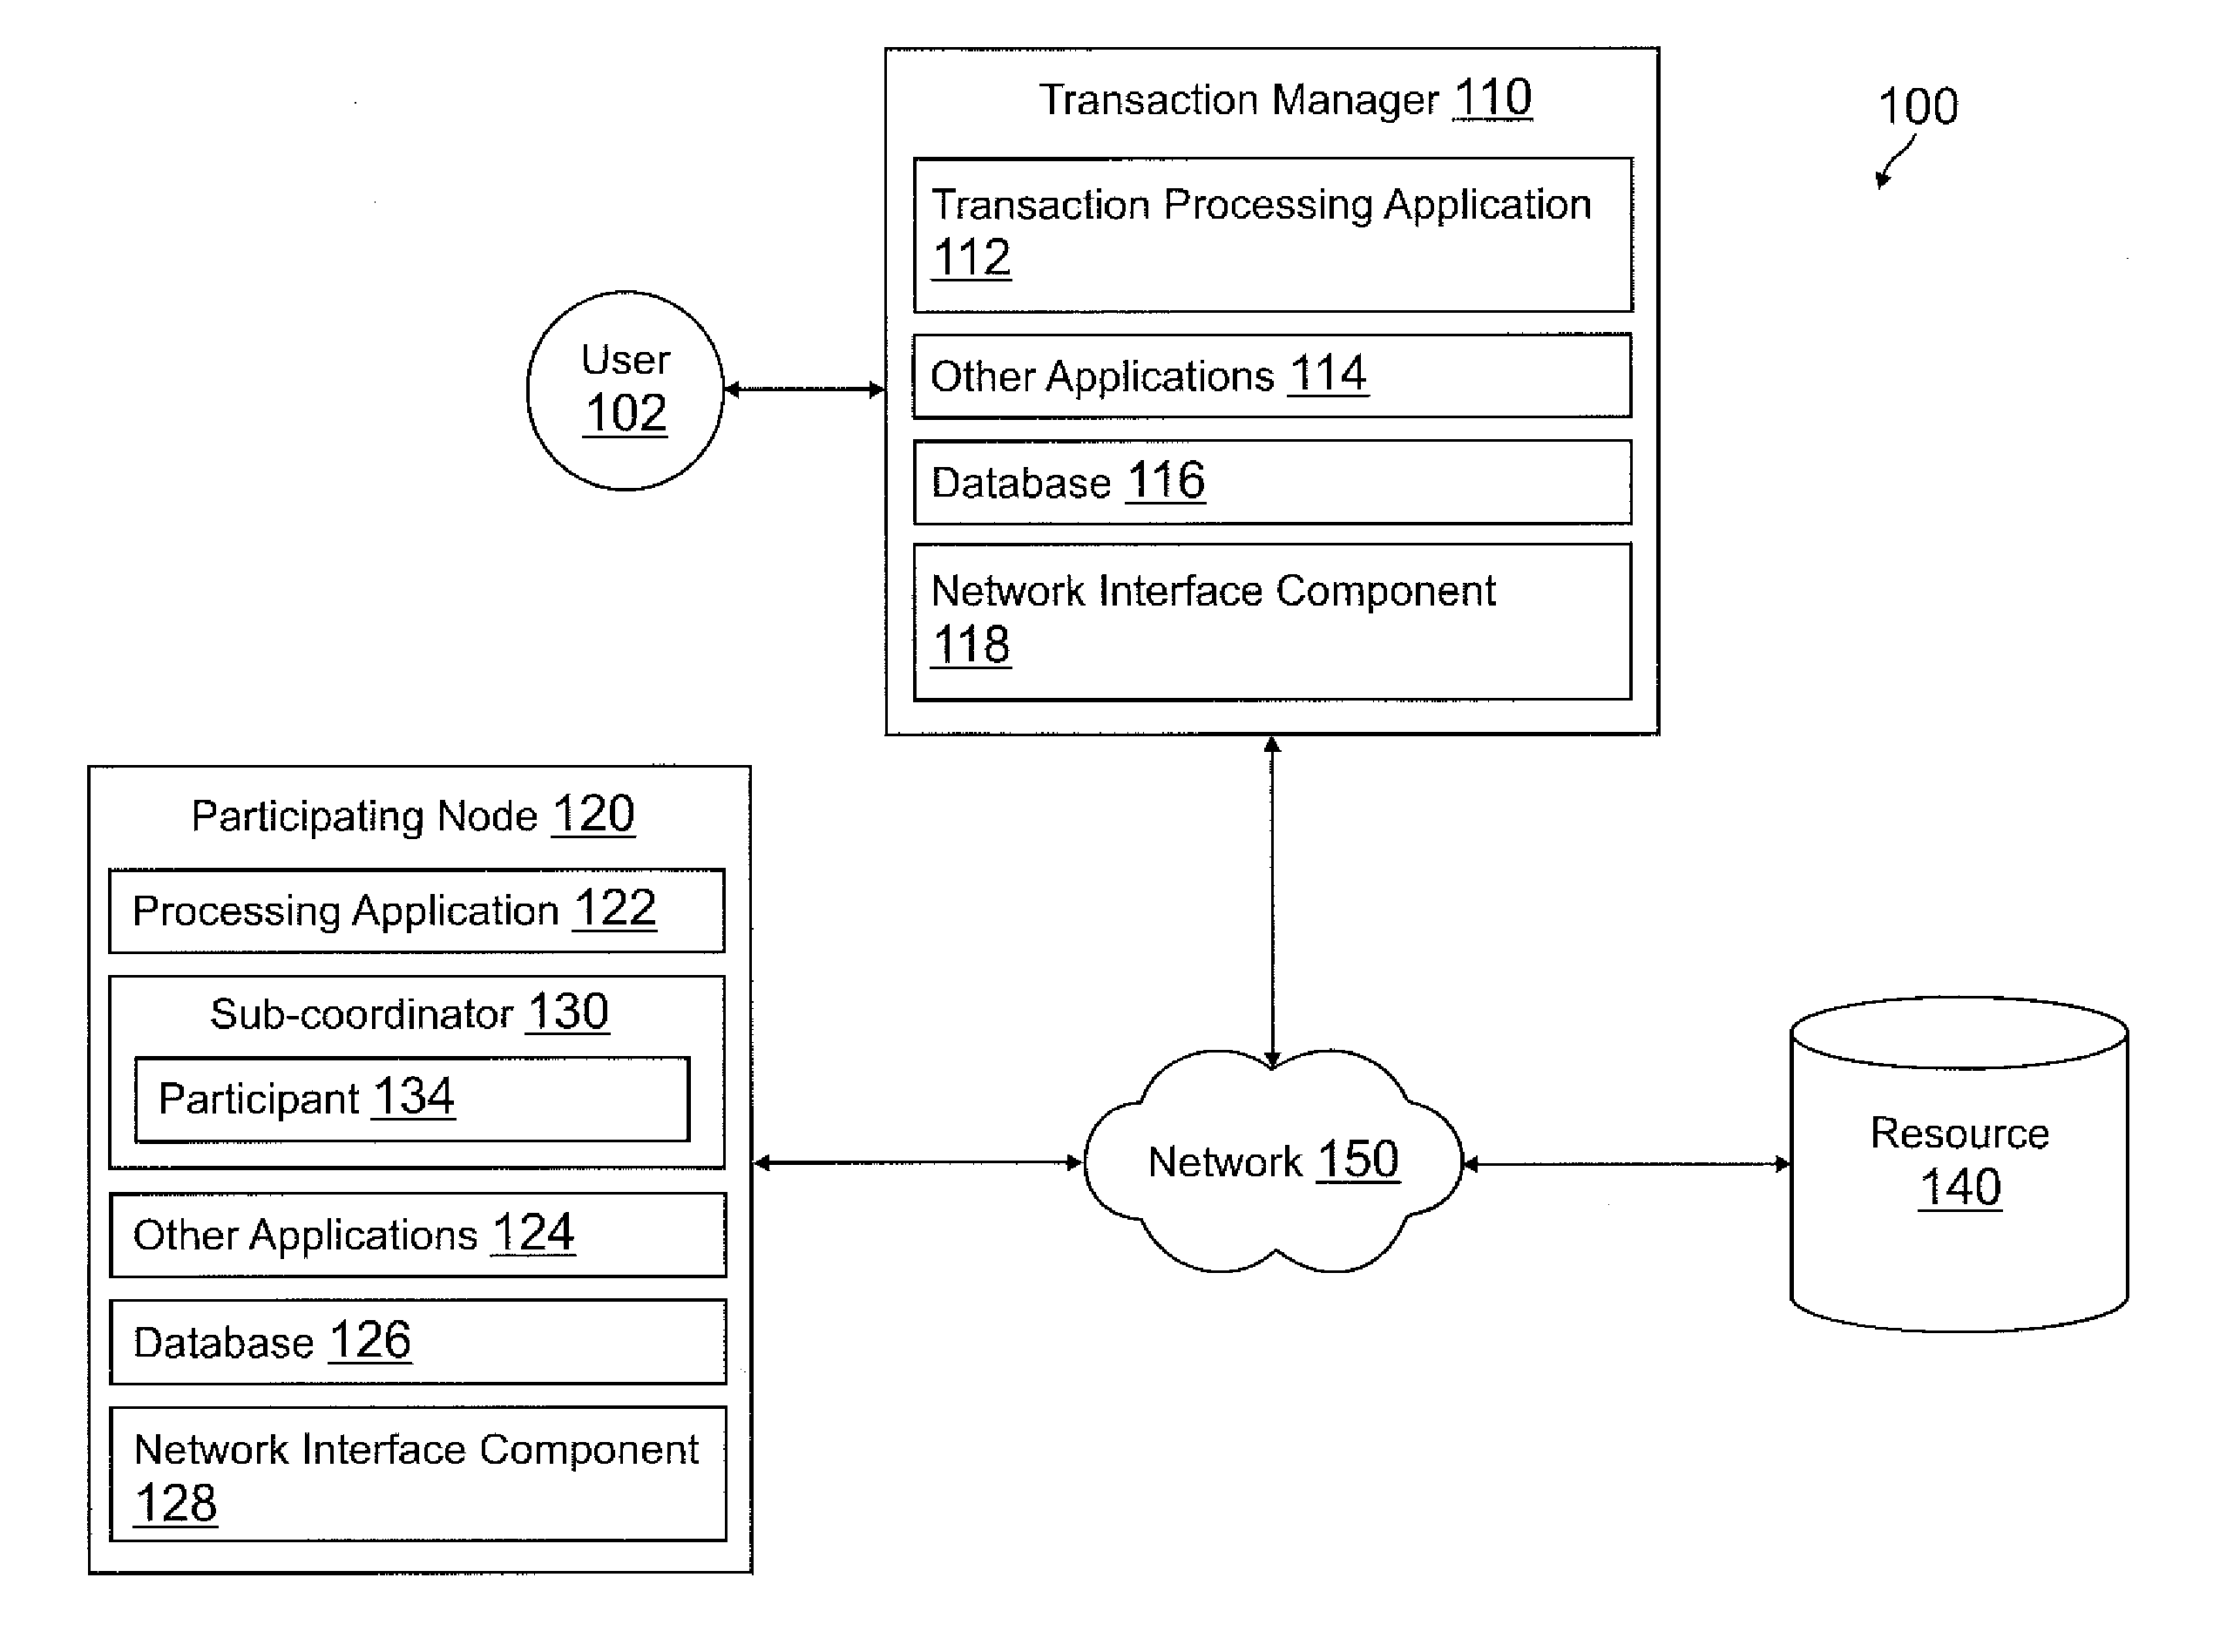 Systems and methods for communicating information of participants registered with a sub-coordinator during distributed transaction processing